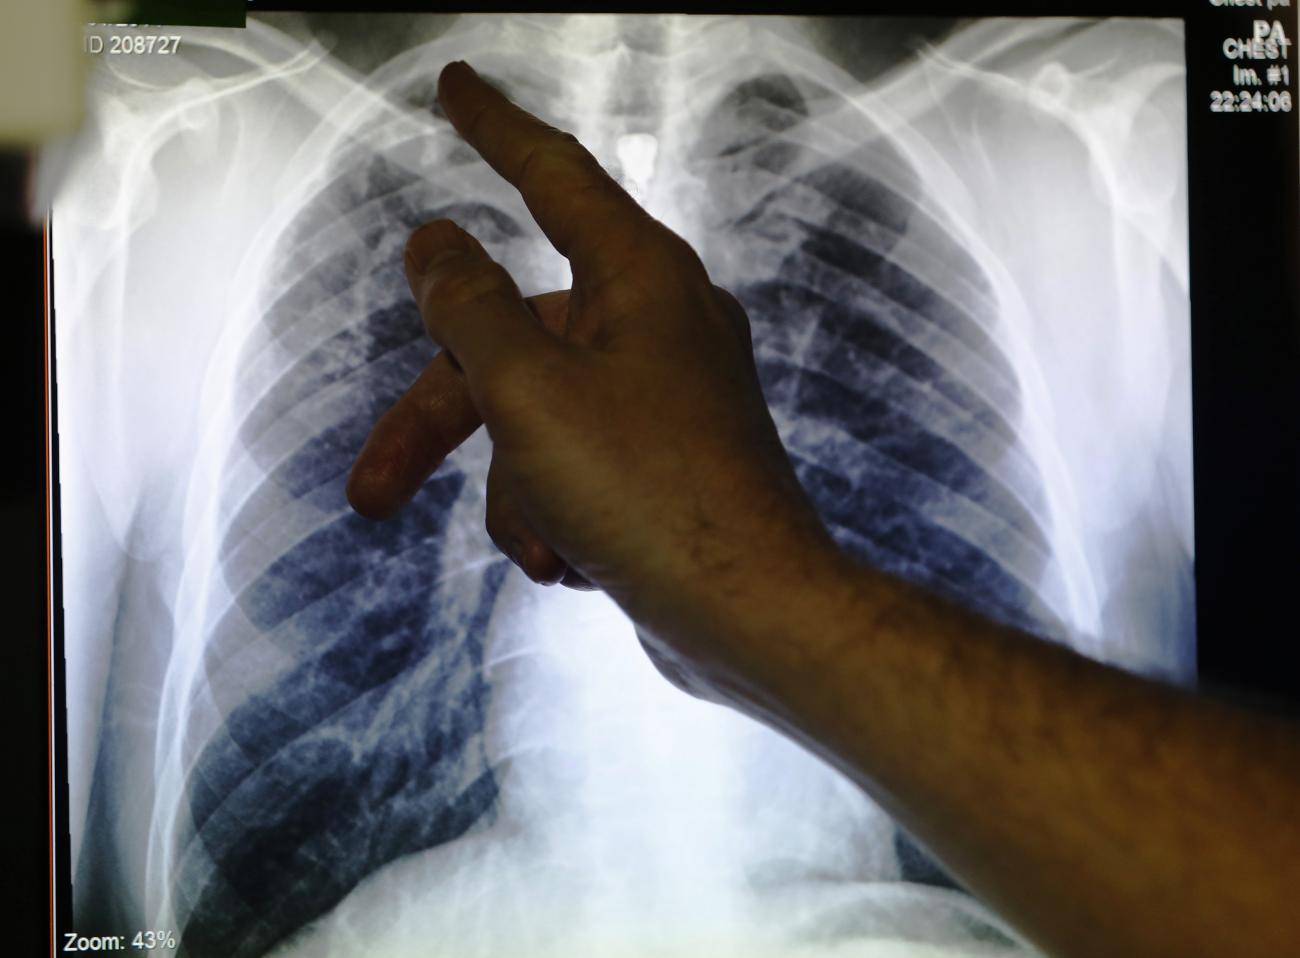 A doctor points to an x-ray showing a pair of lungs with TB (tuberculosis) in London on January 27, 2014.